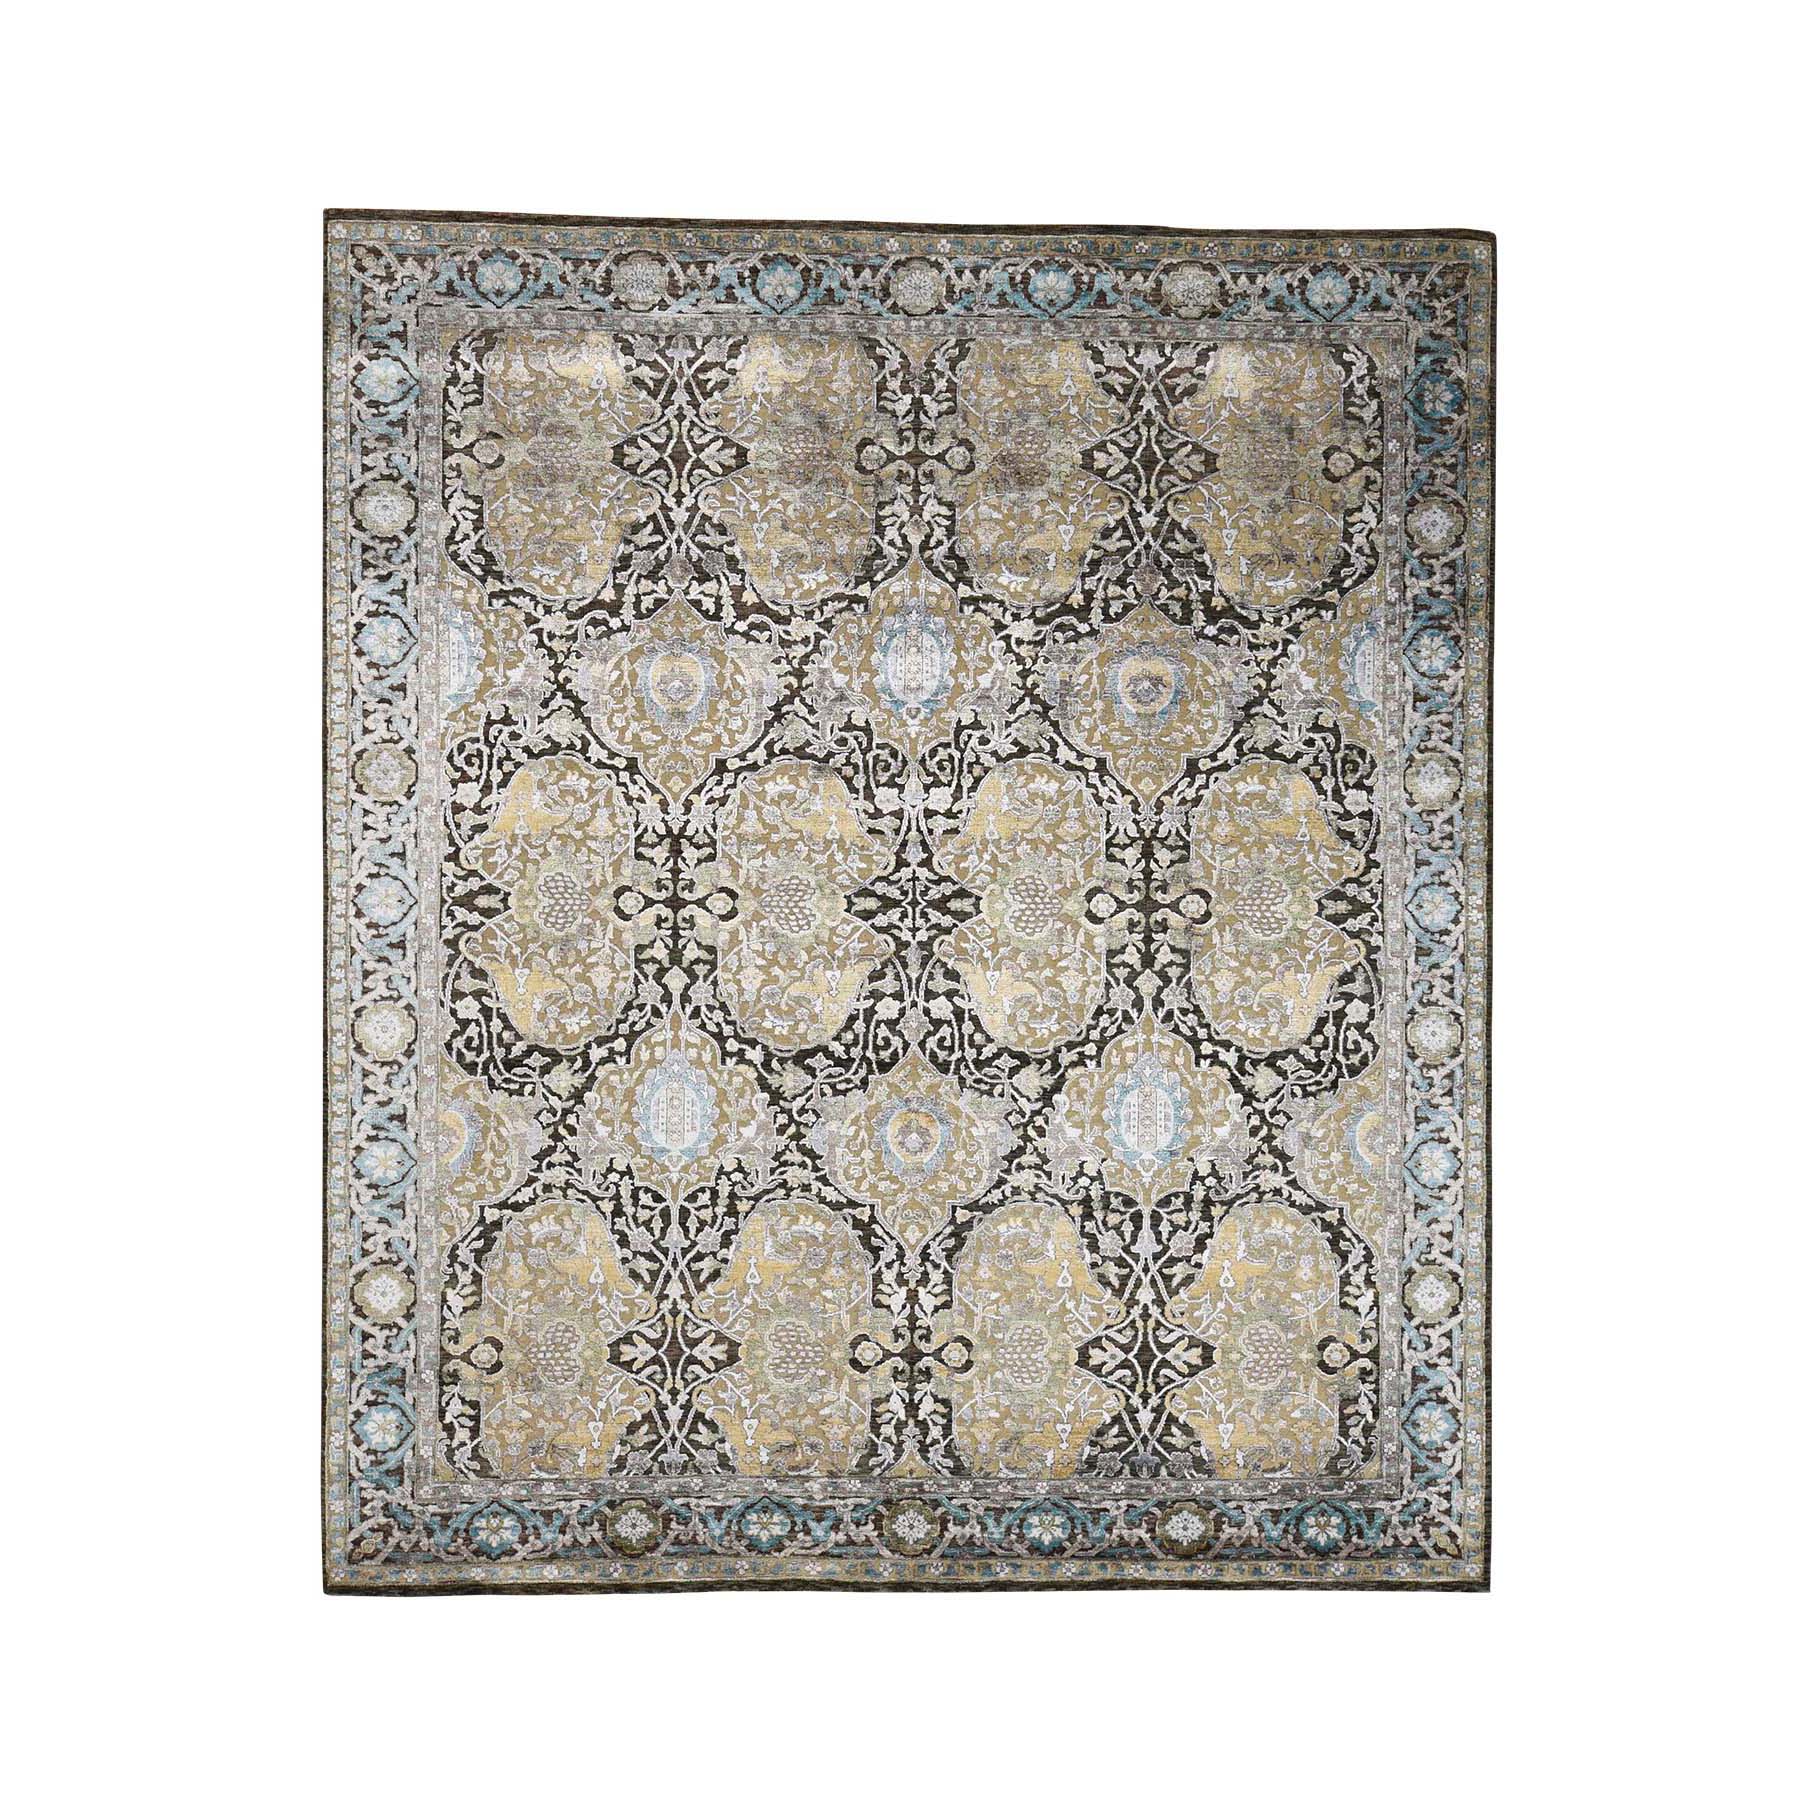  Silk Hand-Knotted Area Rug 8'4